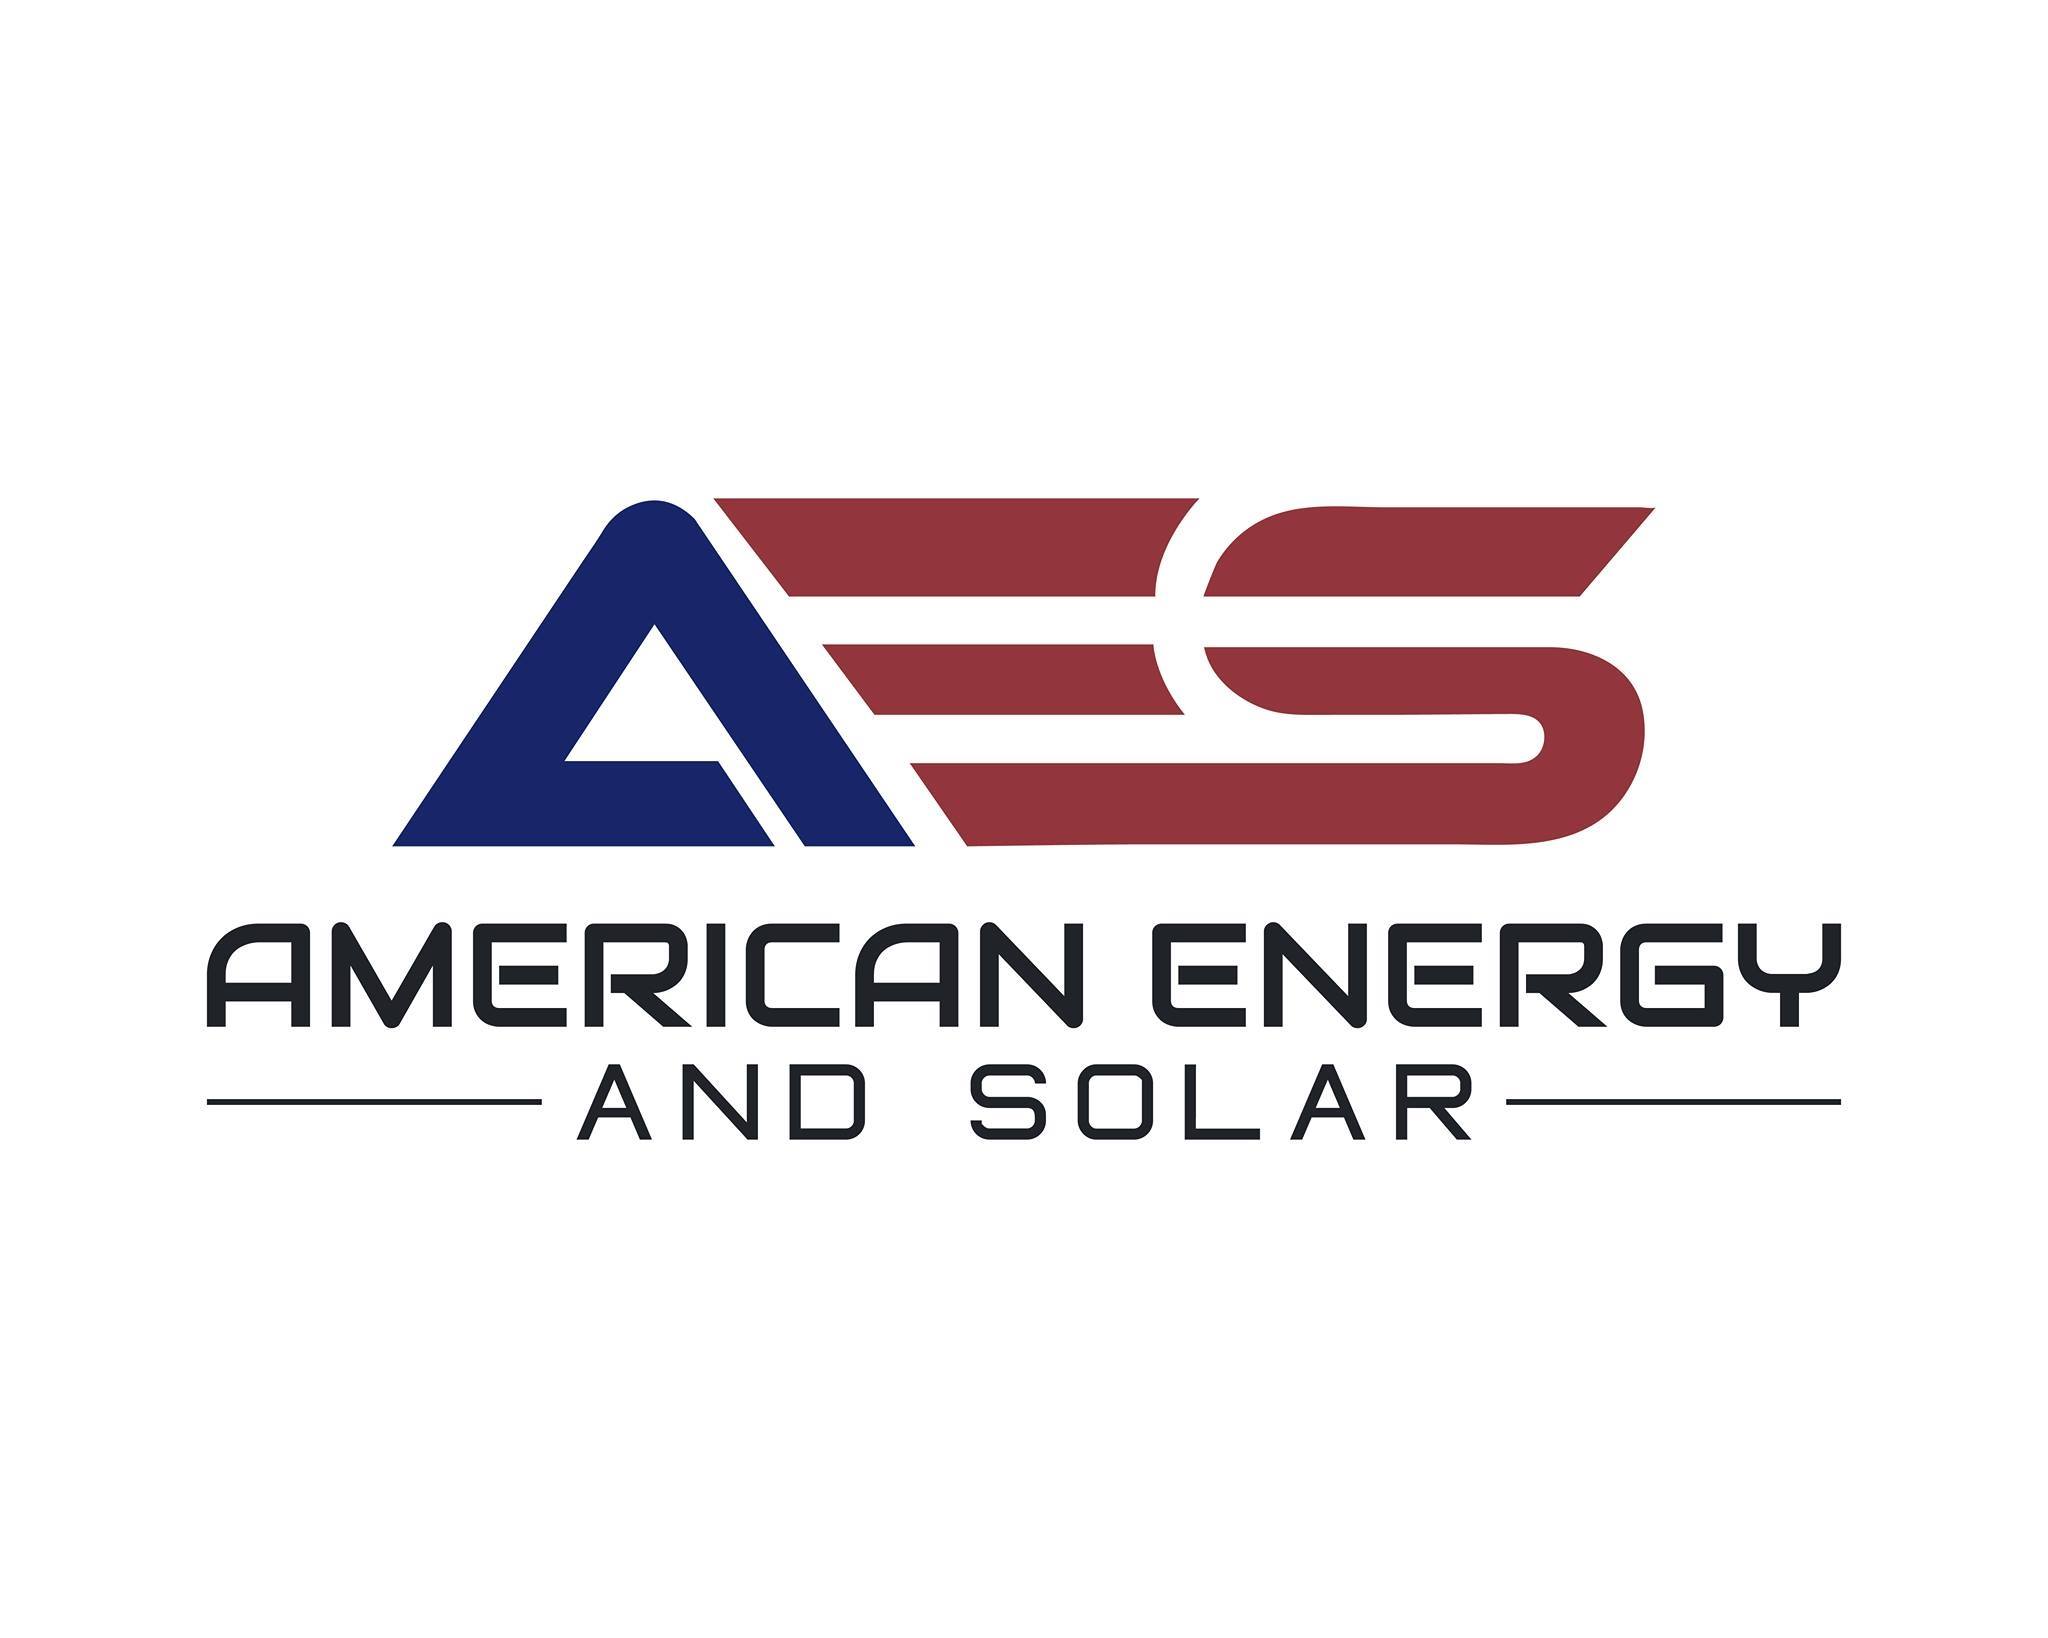 American Energy And Solar (AES) logo